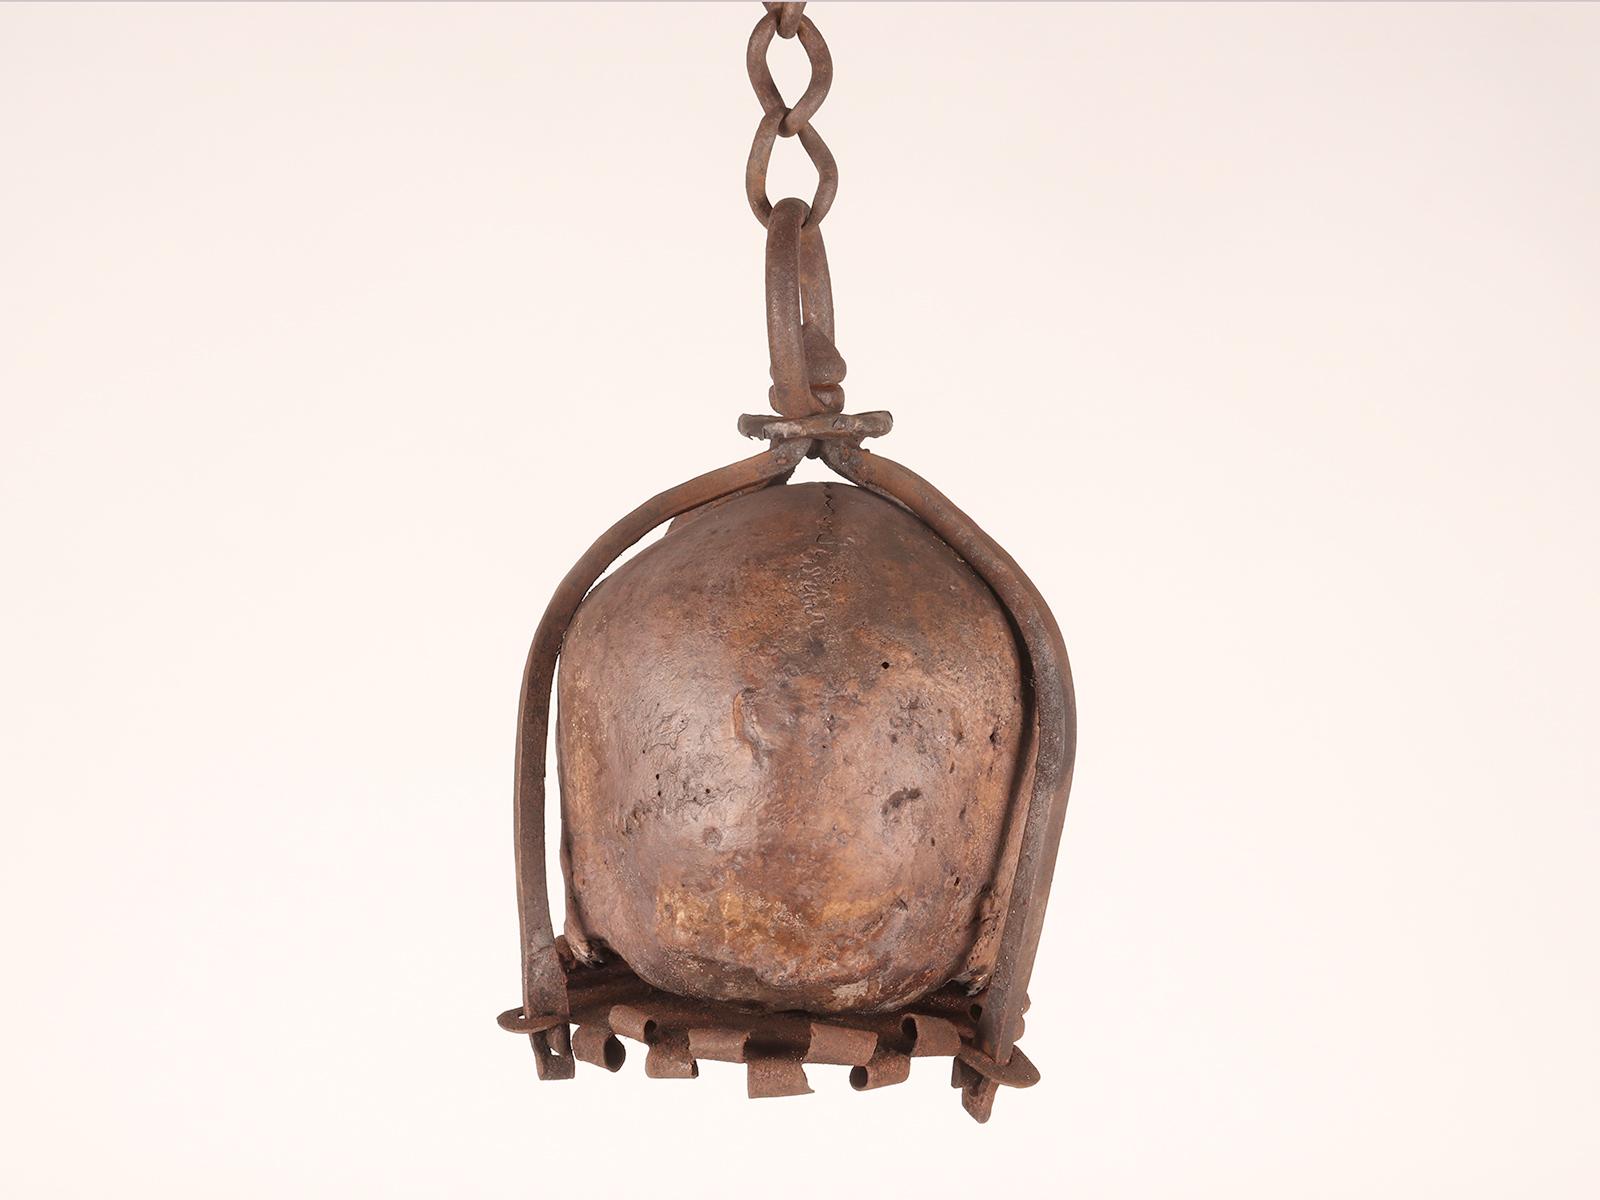 Memento mori. A caged and suspended skull sculpture, Germany, late 17th century. 2